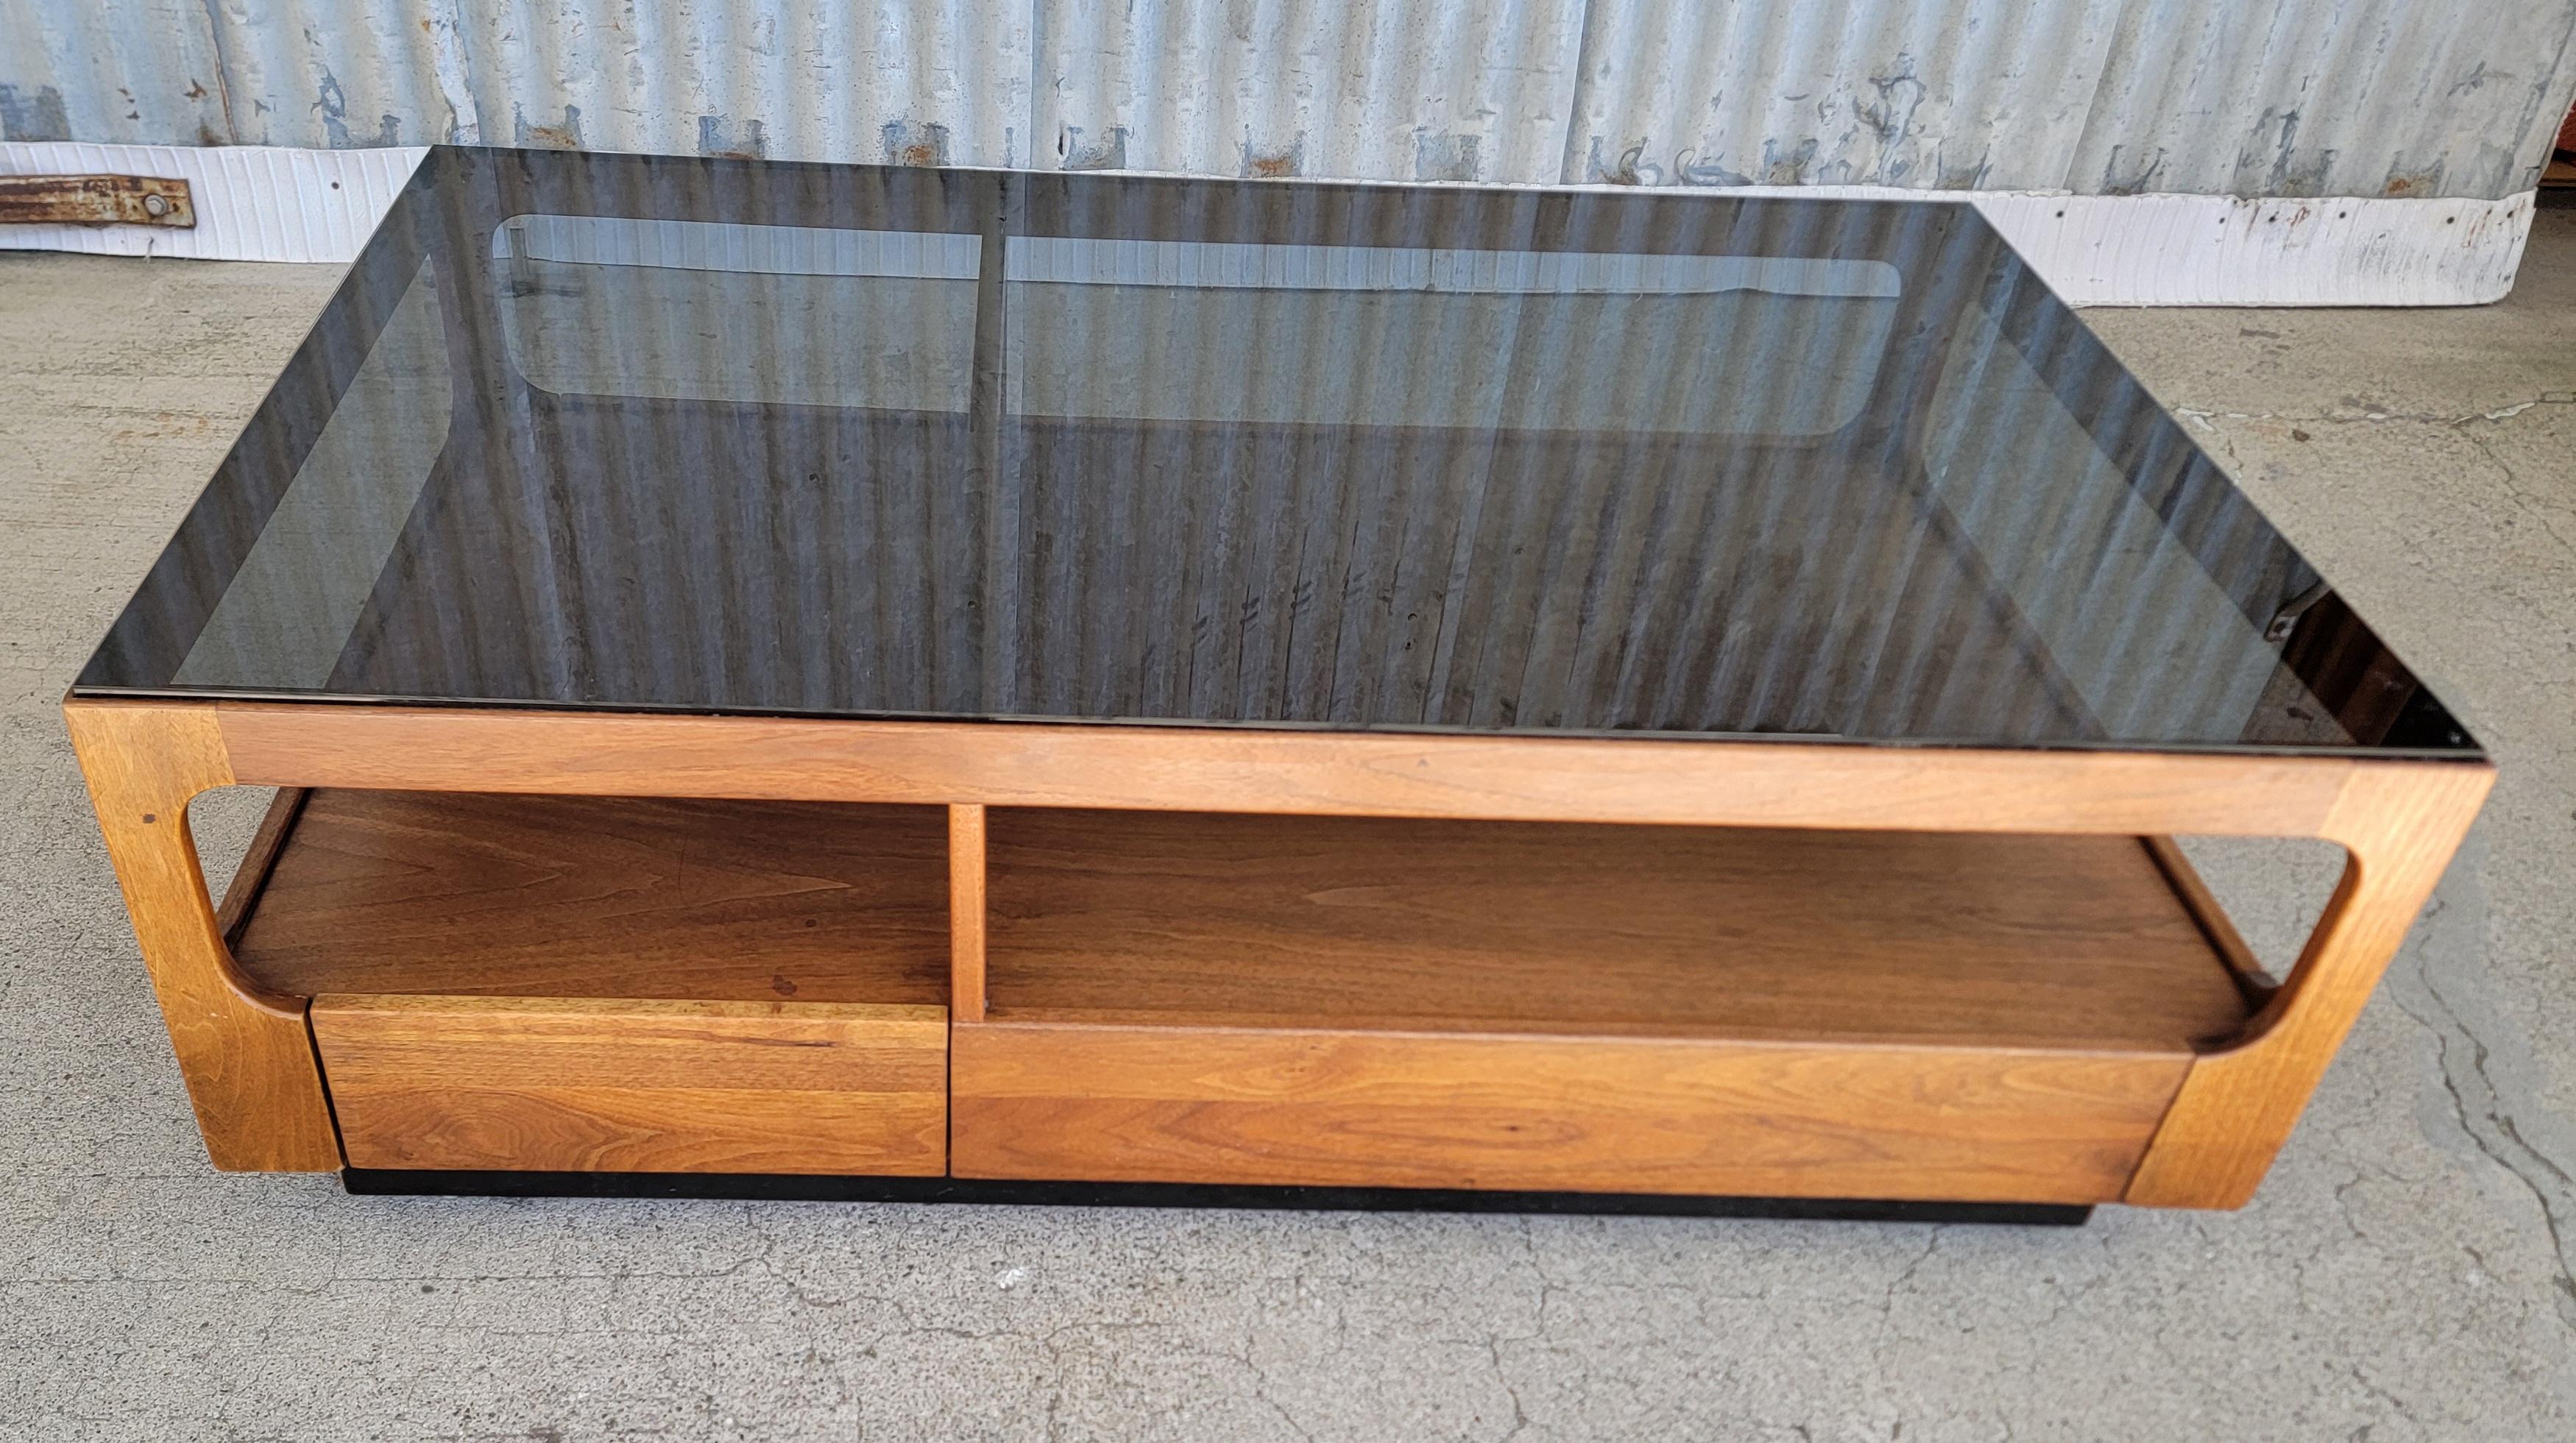 Mid-Century Modern rectangular coffee table designed by John Keal for brown Saltman of California. Circa. 1960.  Features storage or display under smoked glass top and two drawers at table base. Crafted in solid walnut. In very good original vintage